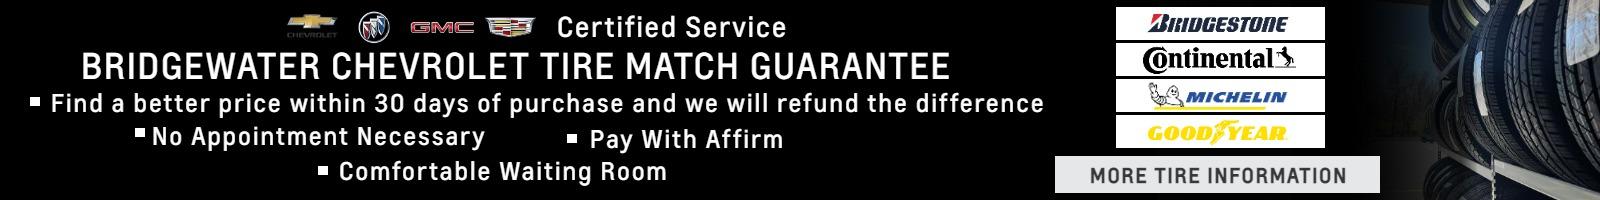 BRIDGEWATER CHEVROLET TIRE MATCH GUARANTEE

Find a better price within 30 days of purchase and we will refund the difference
No Appointment Necessary
Pay With Affirm
Comfortable Waiting Room